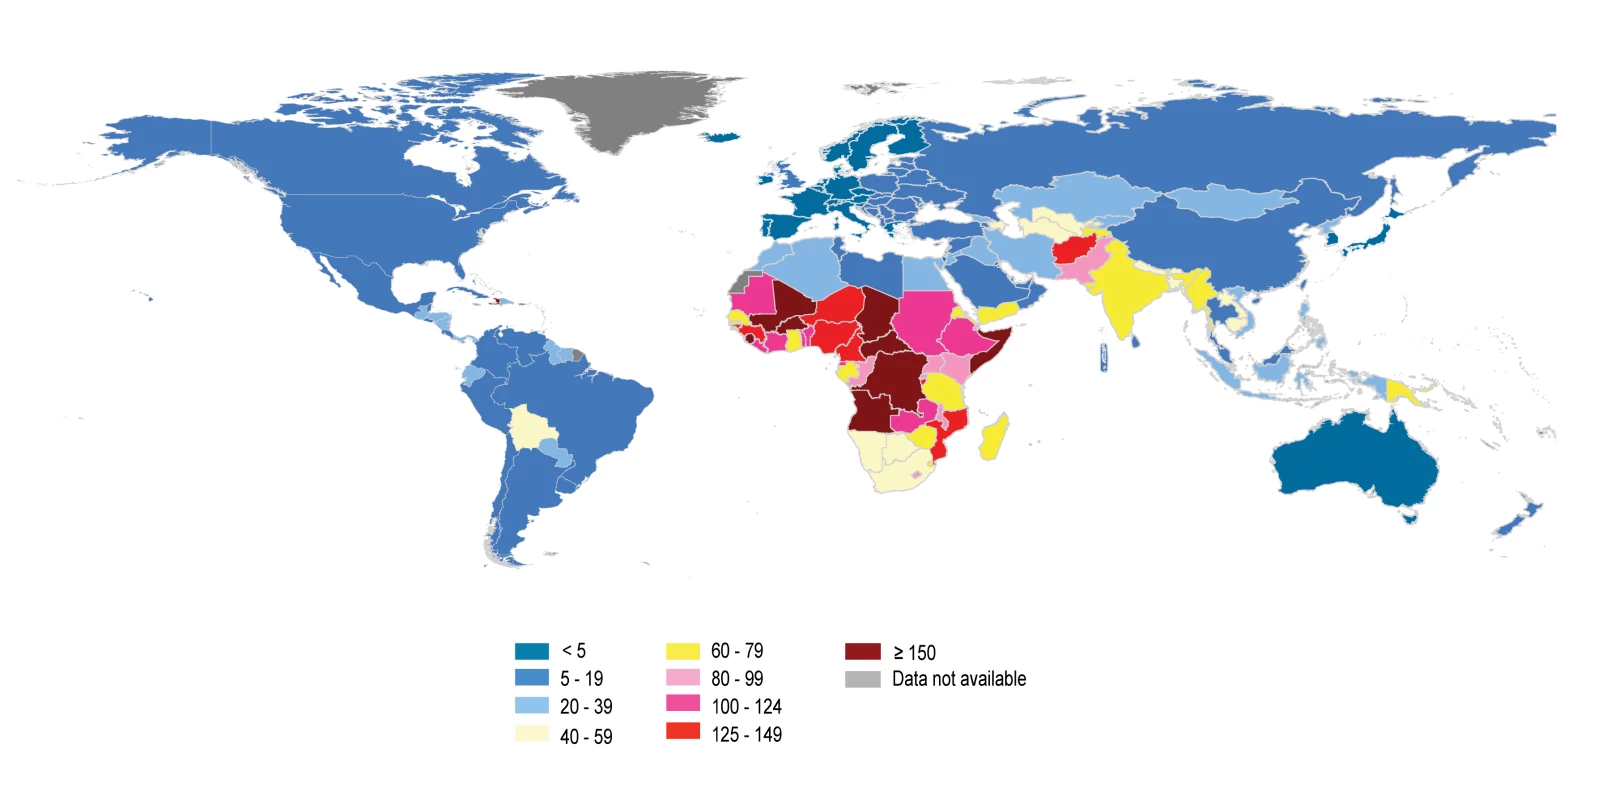 Under-five mortality rate by country for 2010.